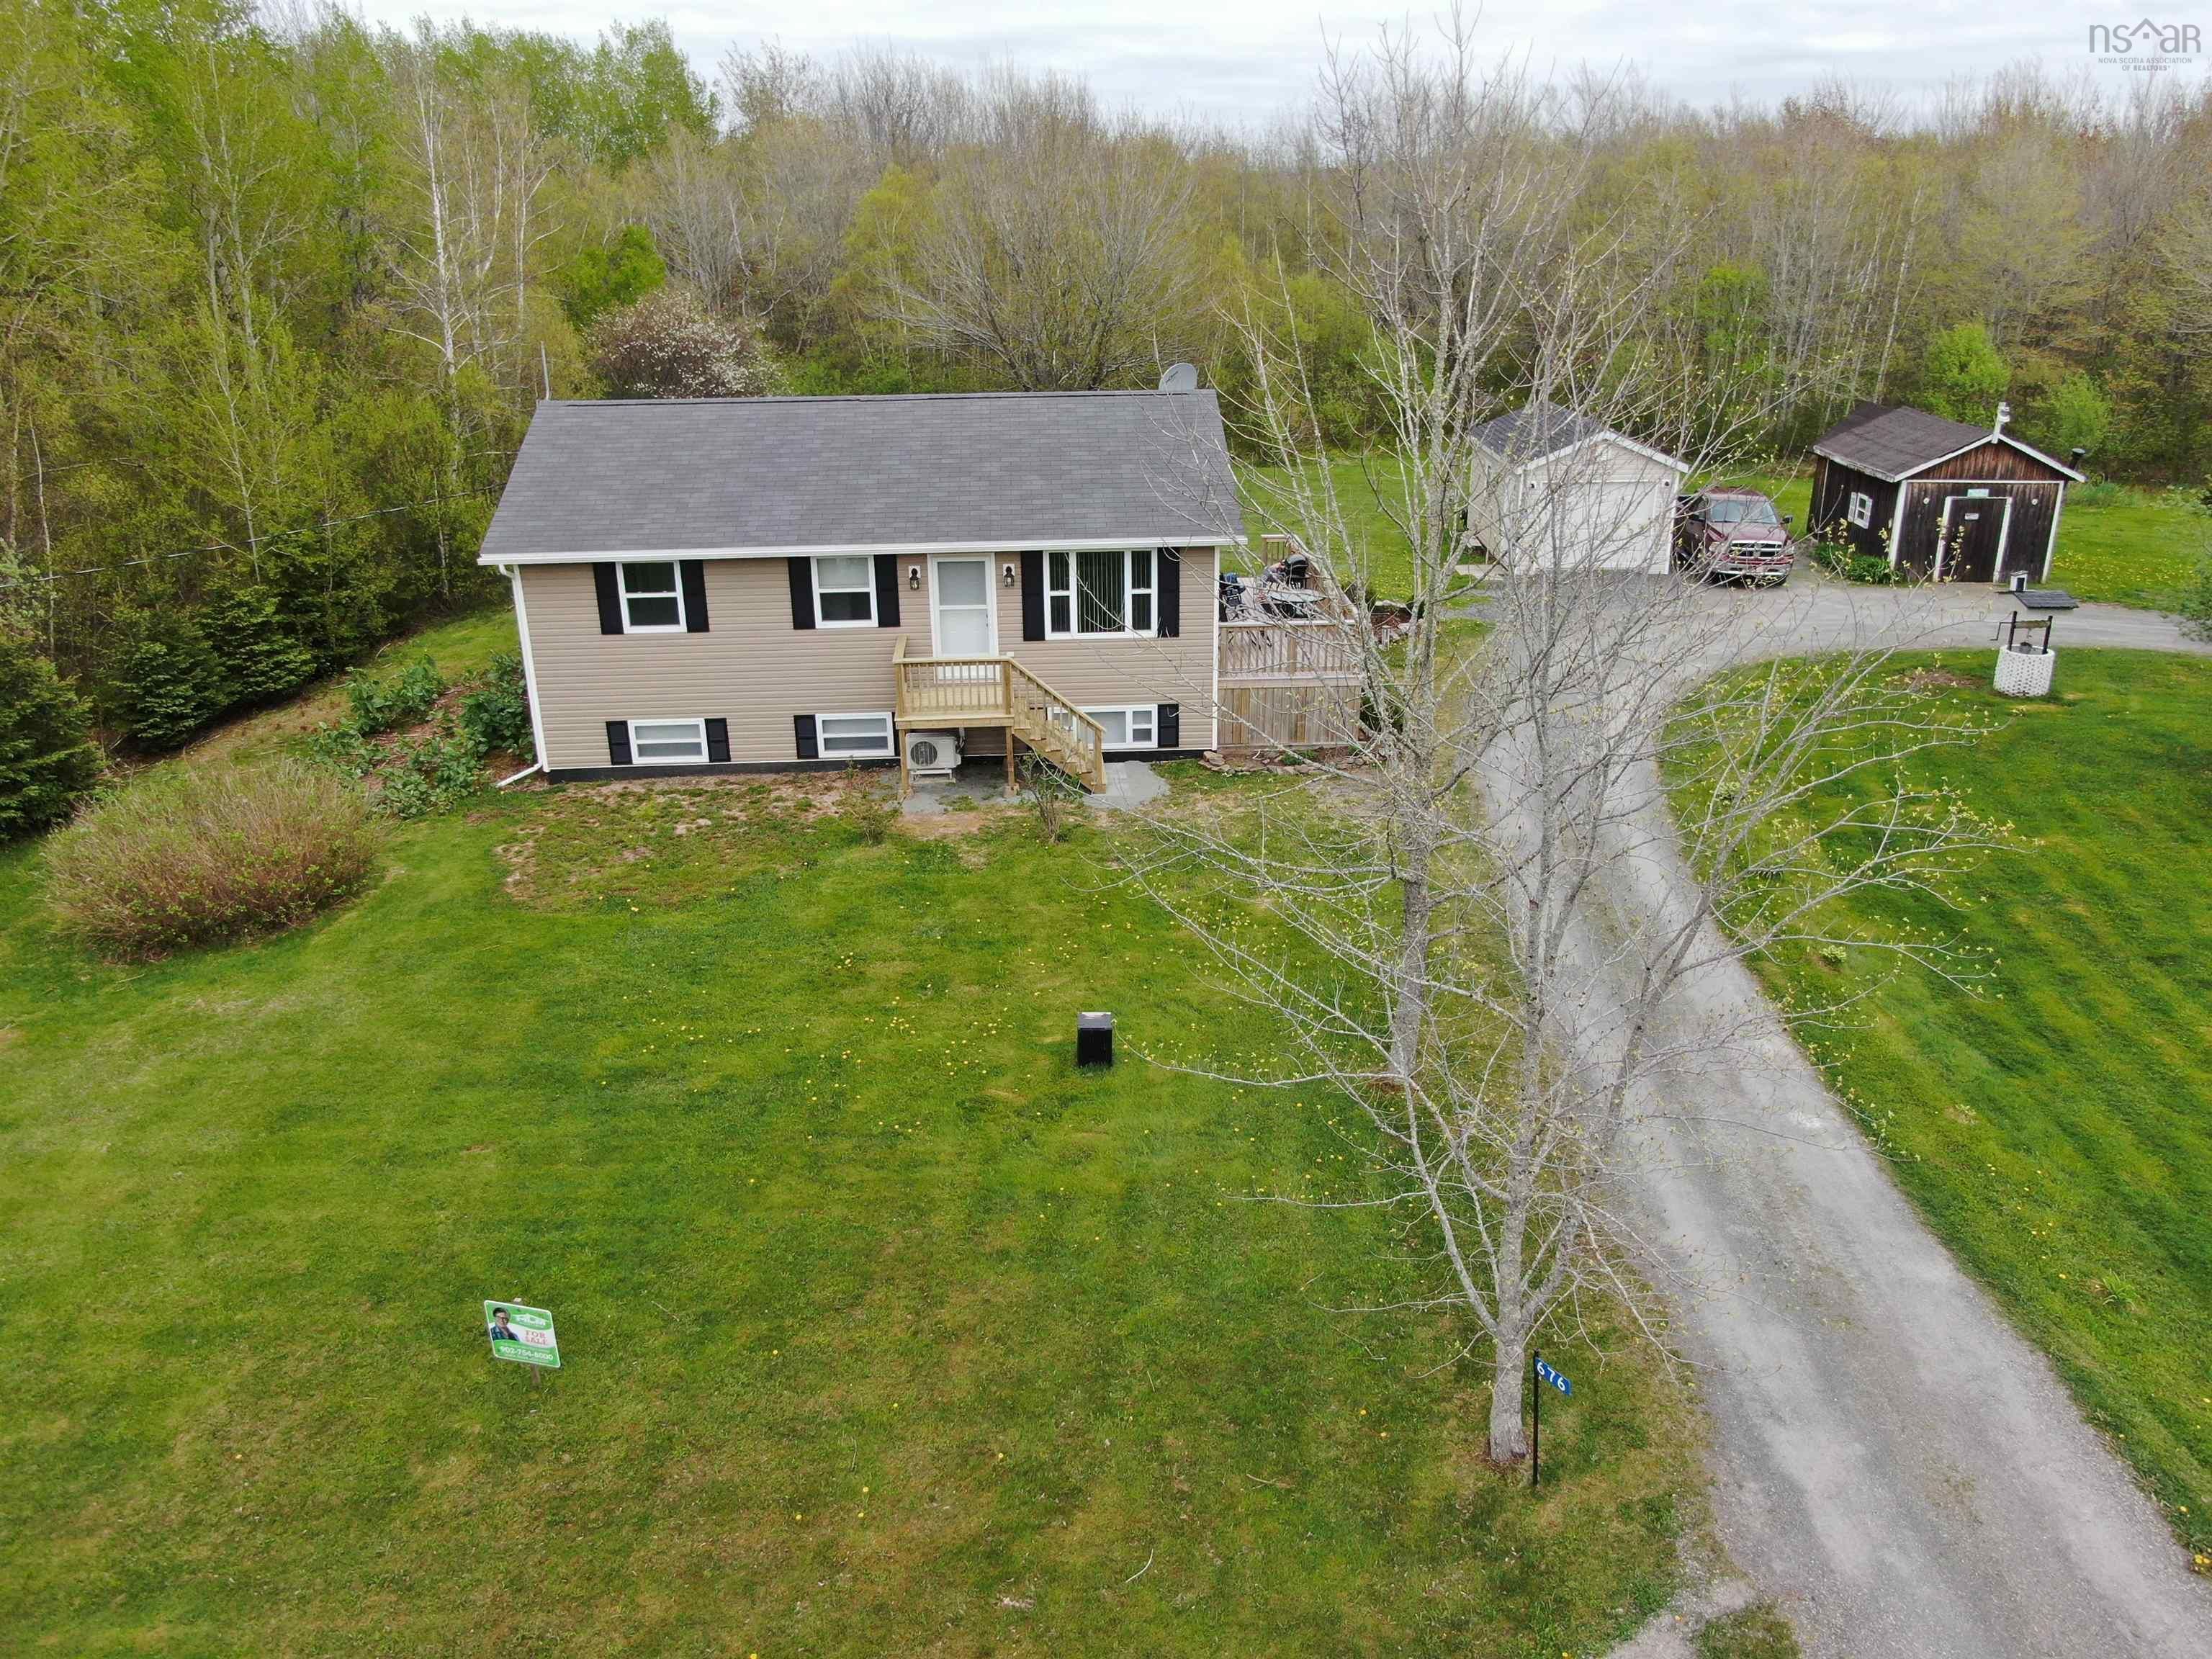 Main Photo: 676 Lamont Road in Merigomish: 108-Rural Pictou County Residential for sale (Northern Region)  : MLS®# 202210584